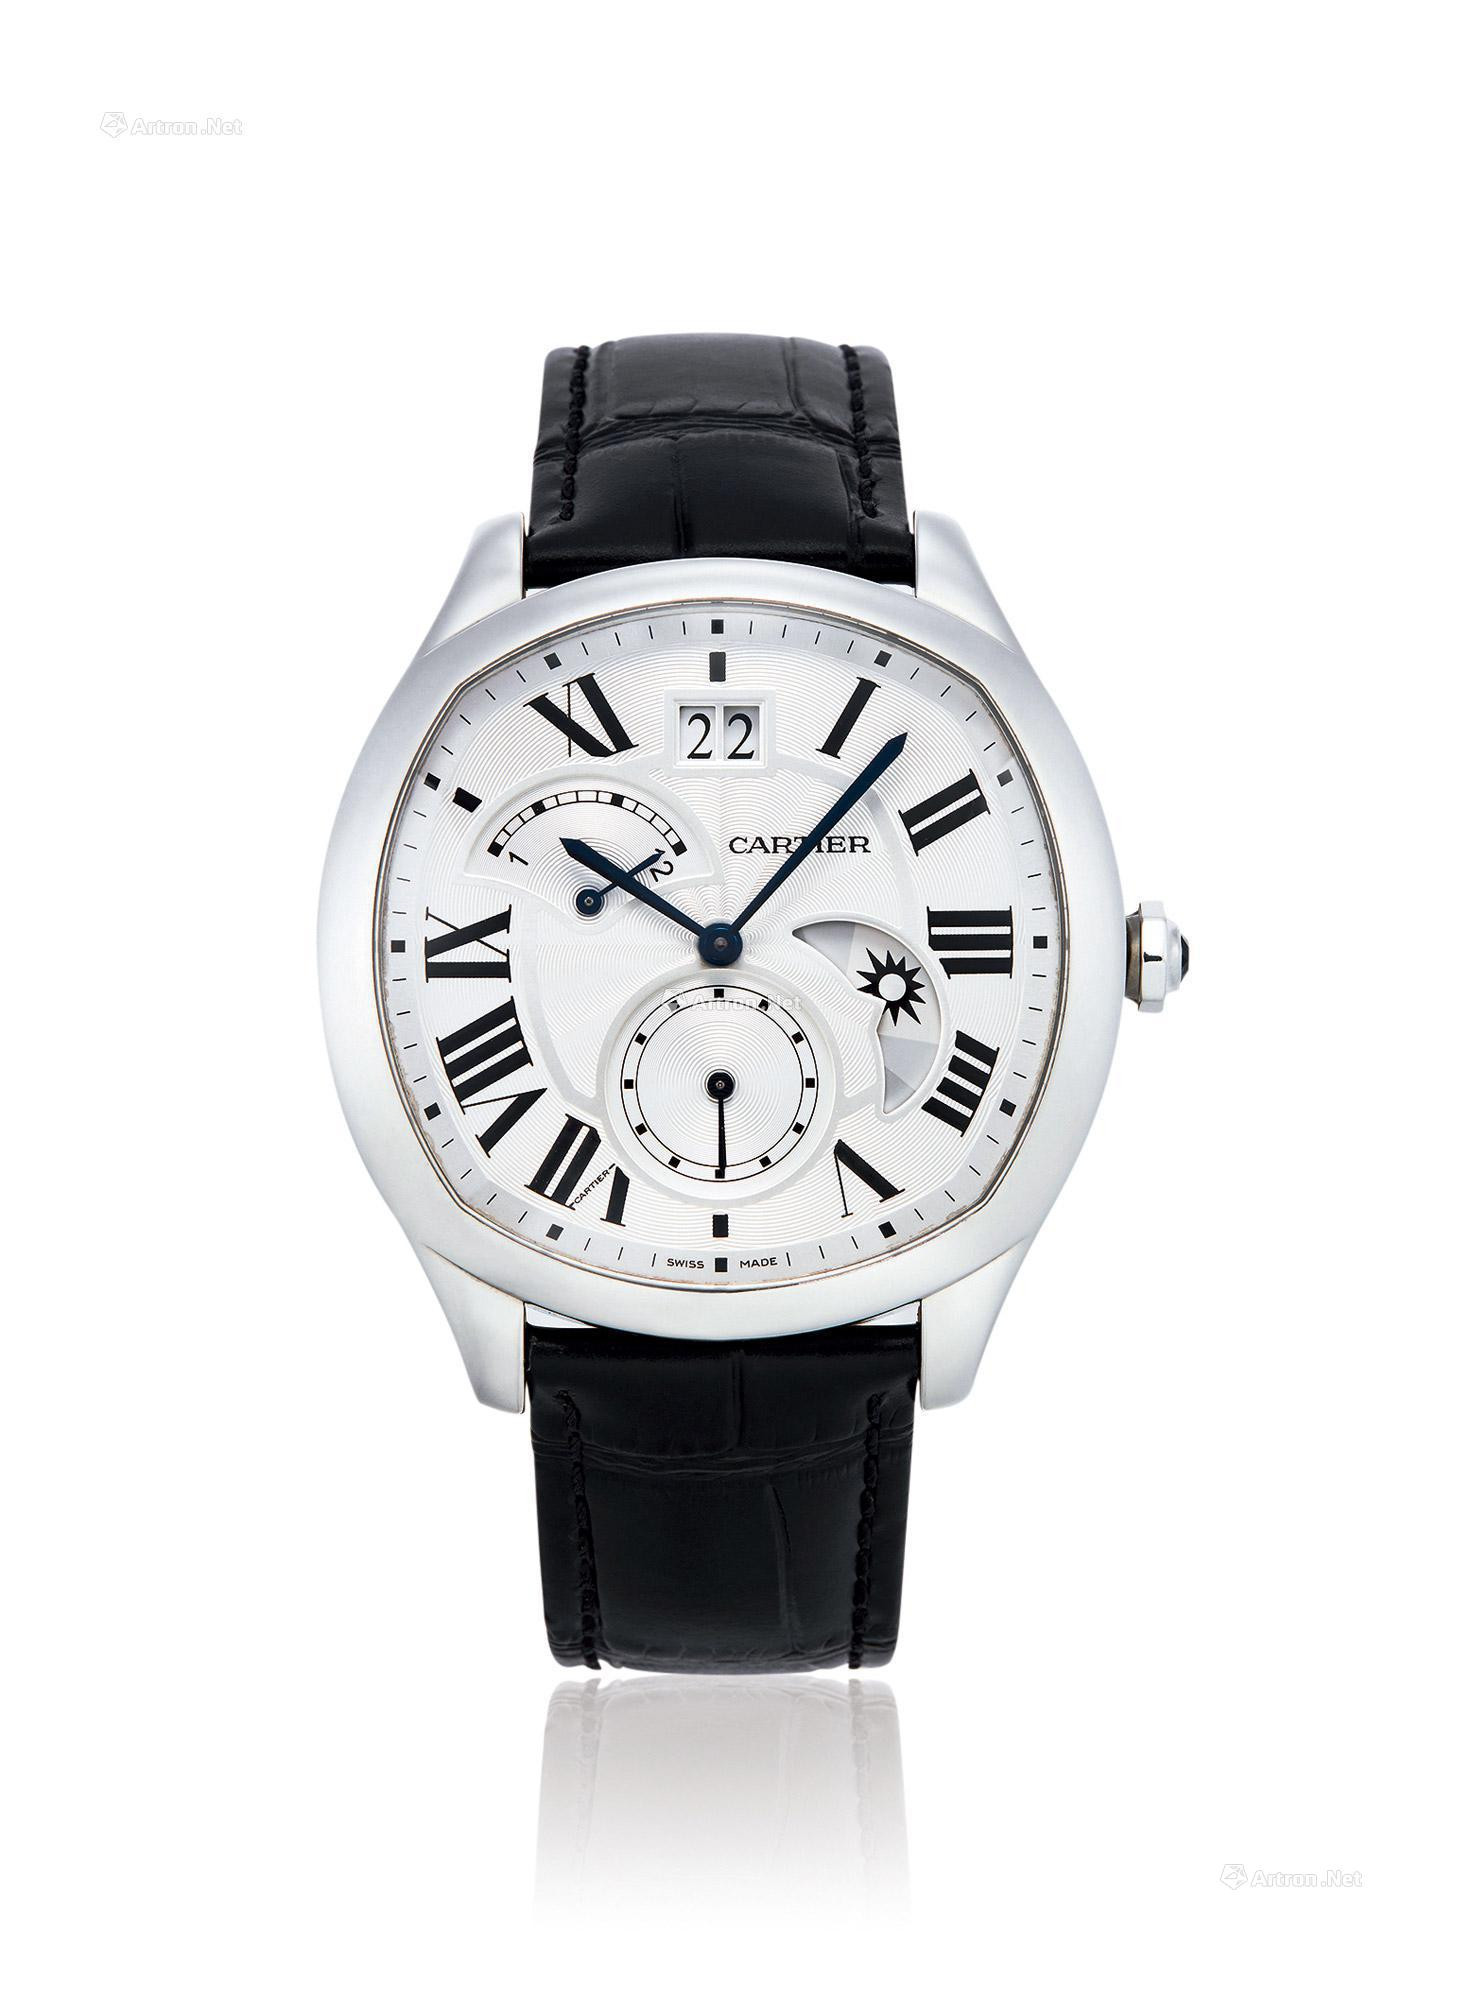 CARTIER  A FINE STAINLESS STEEL AUTOMATIC WRISTWATCH， WITH DATE， SMALL SECONDS， RETROGRADE DUAL TIME ZONE AND DAY/NIGHT INDICATION， CERTIFICATE OF ORIGINAL AND PRESENTATION BOX